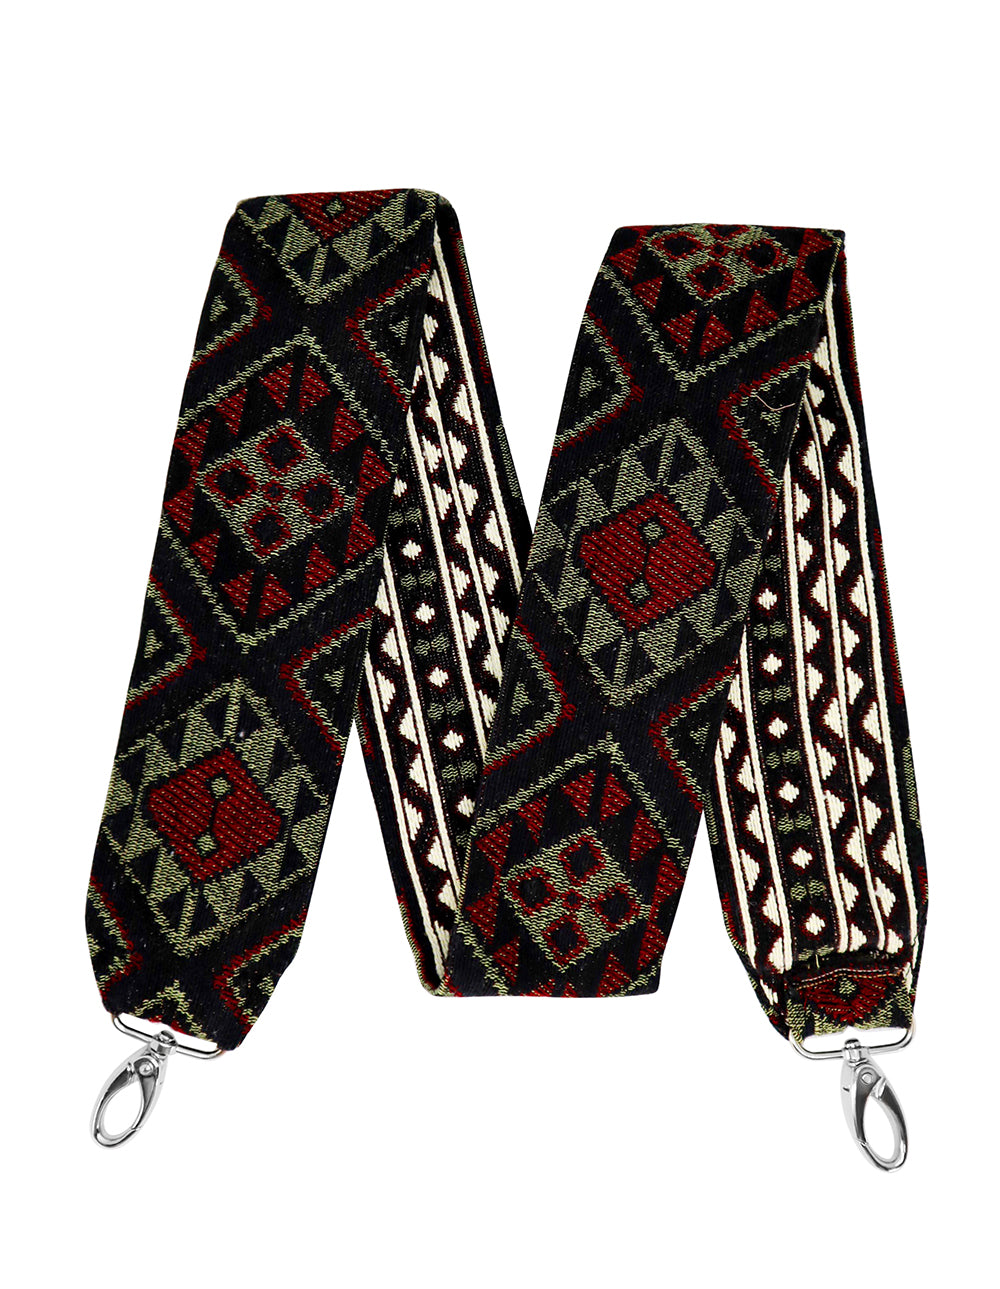 Bag Strap with Ethnic Pattern 4 